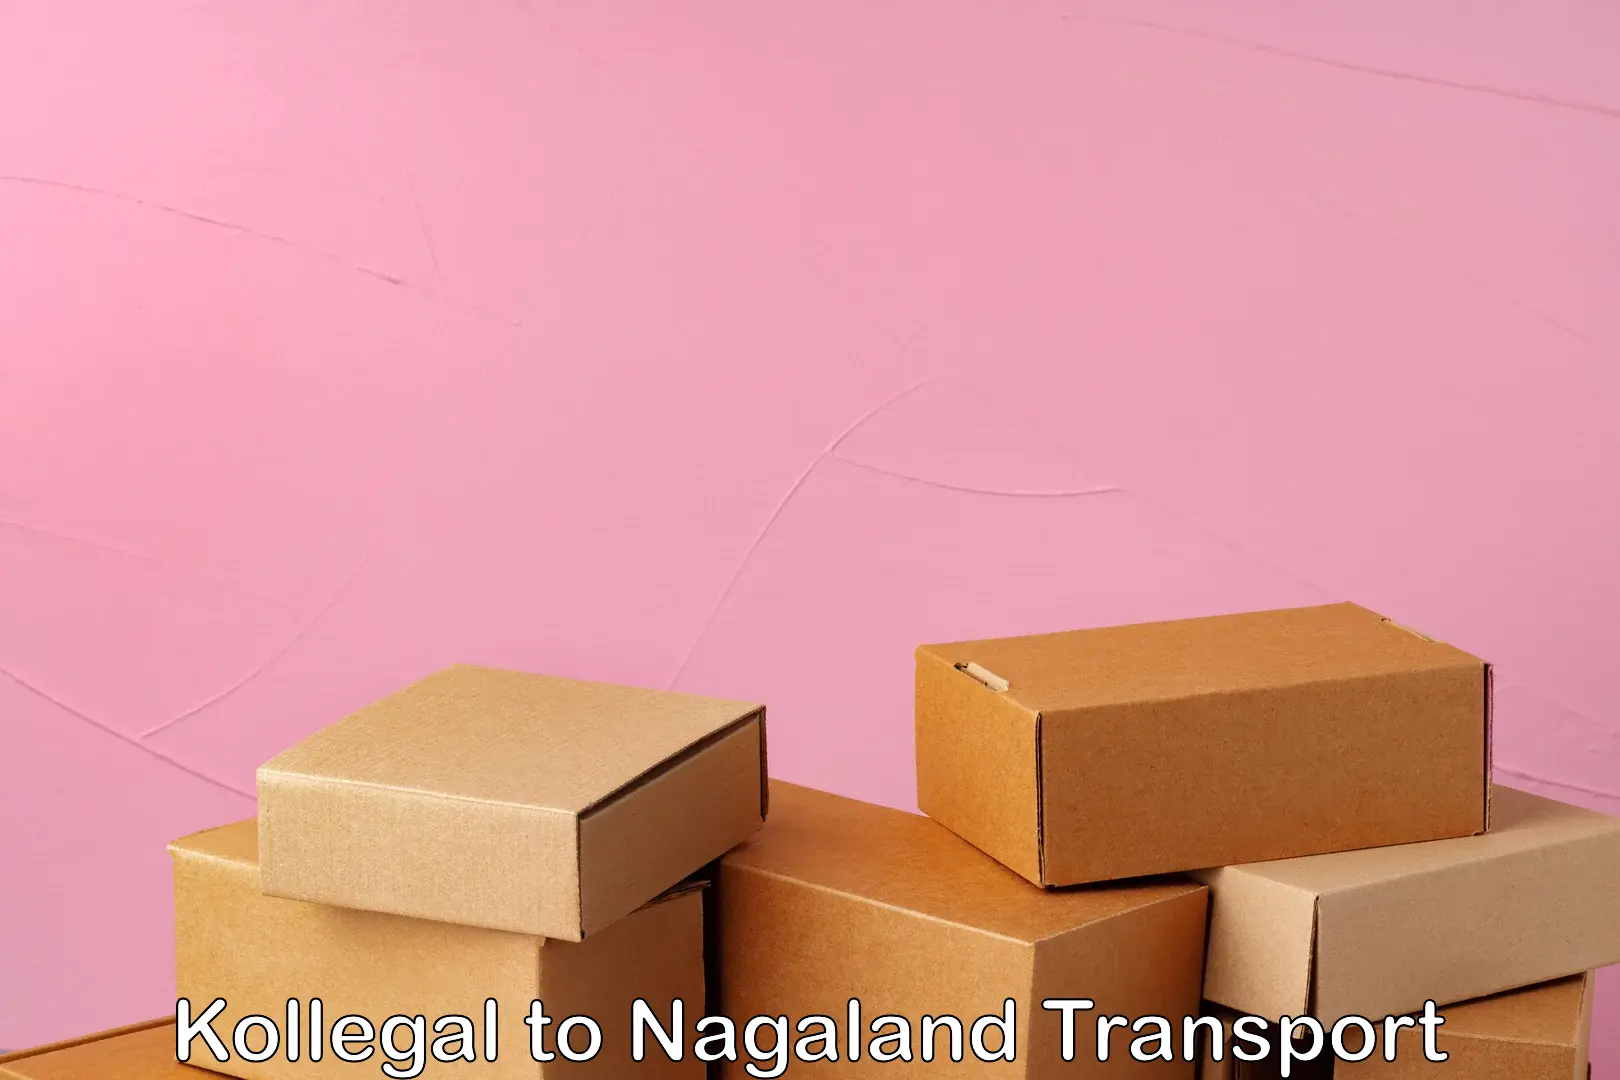 Nearby transport service Kollegal to Nagaland